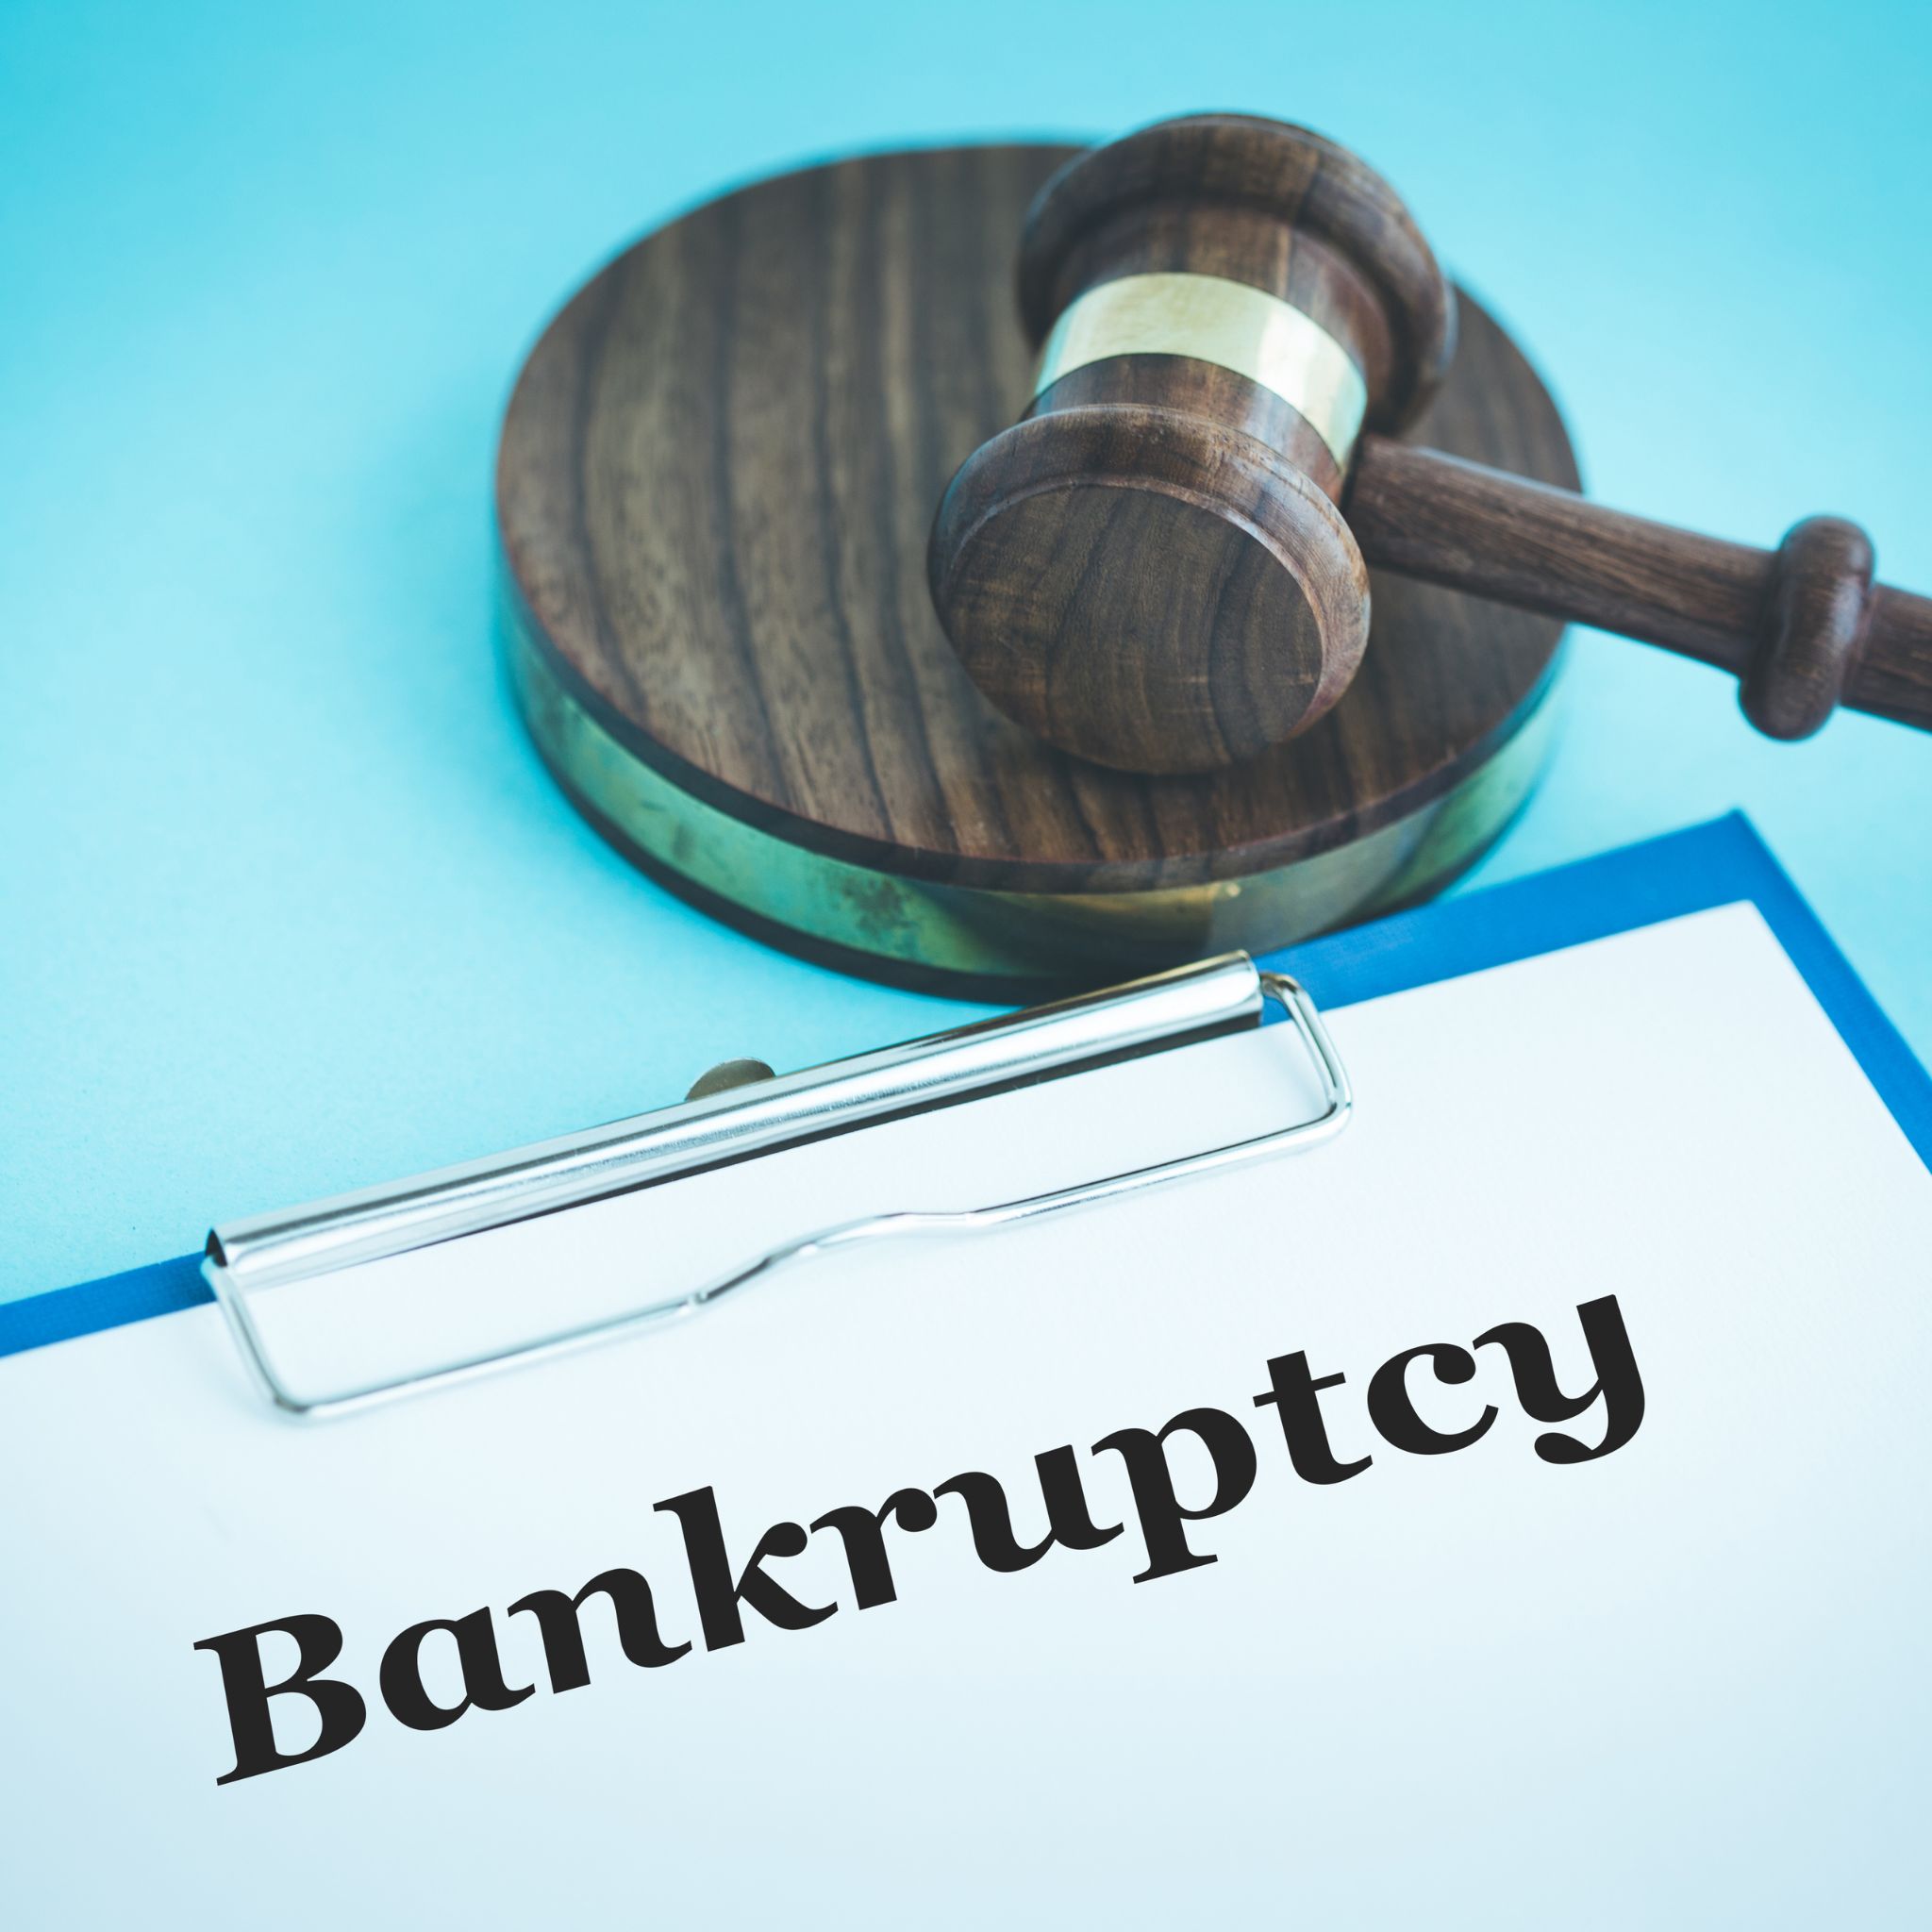 The Complete List of Solar Bankruptcies and Business Closures - post